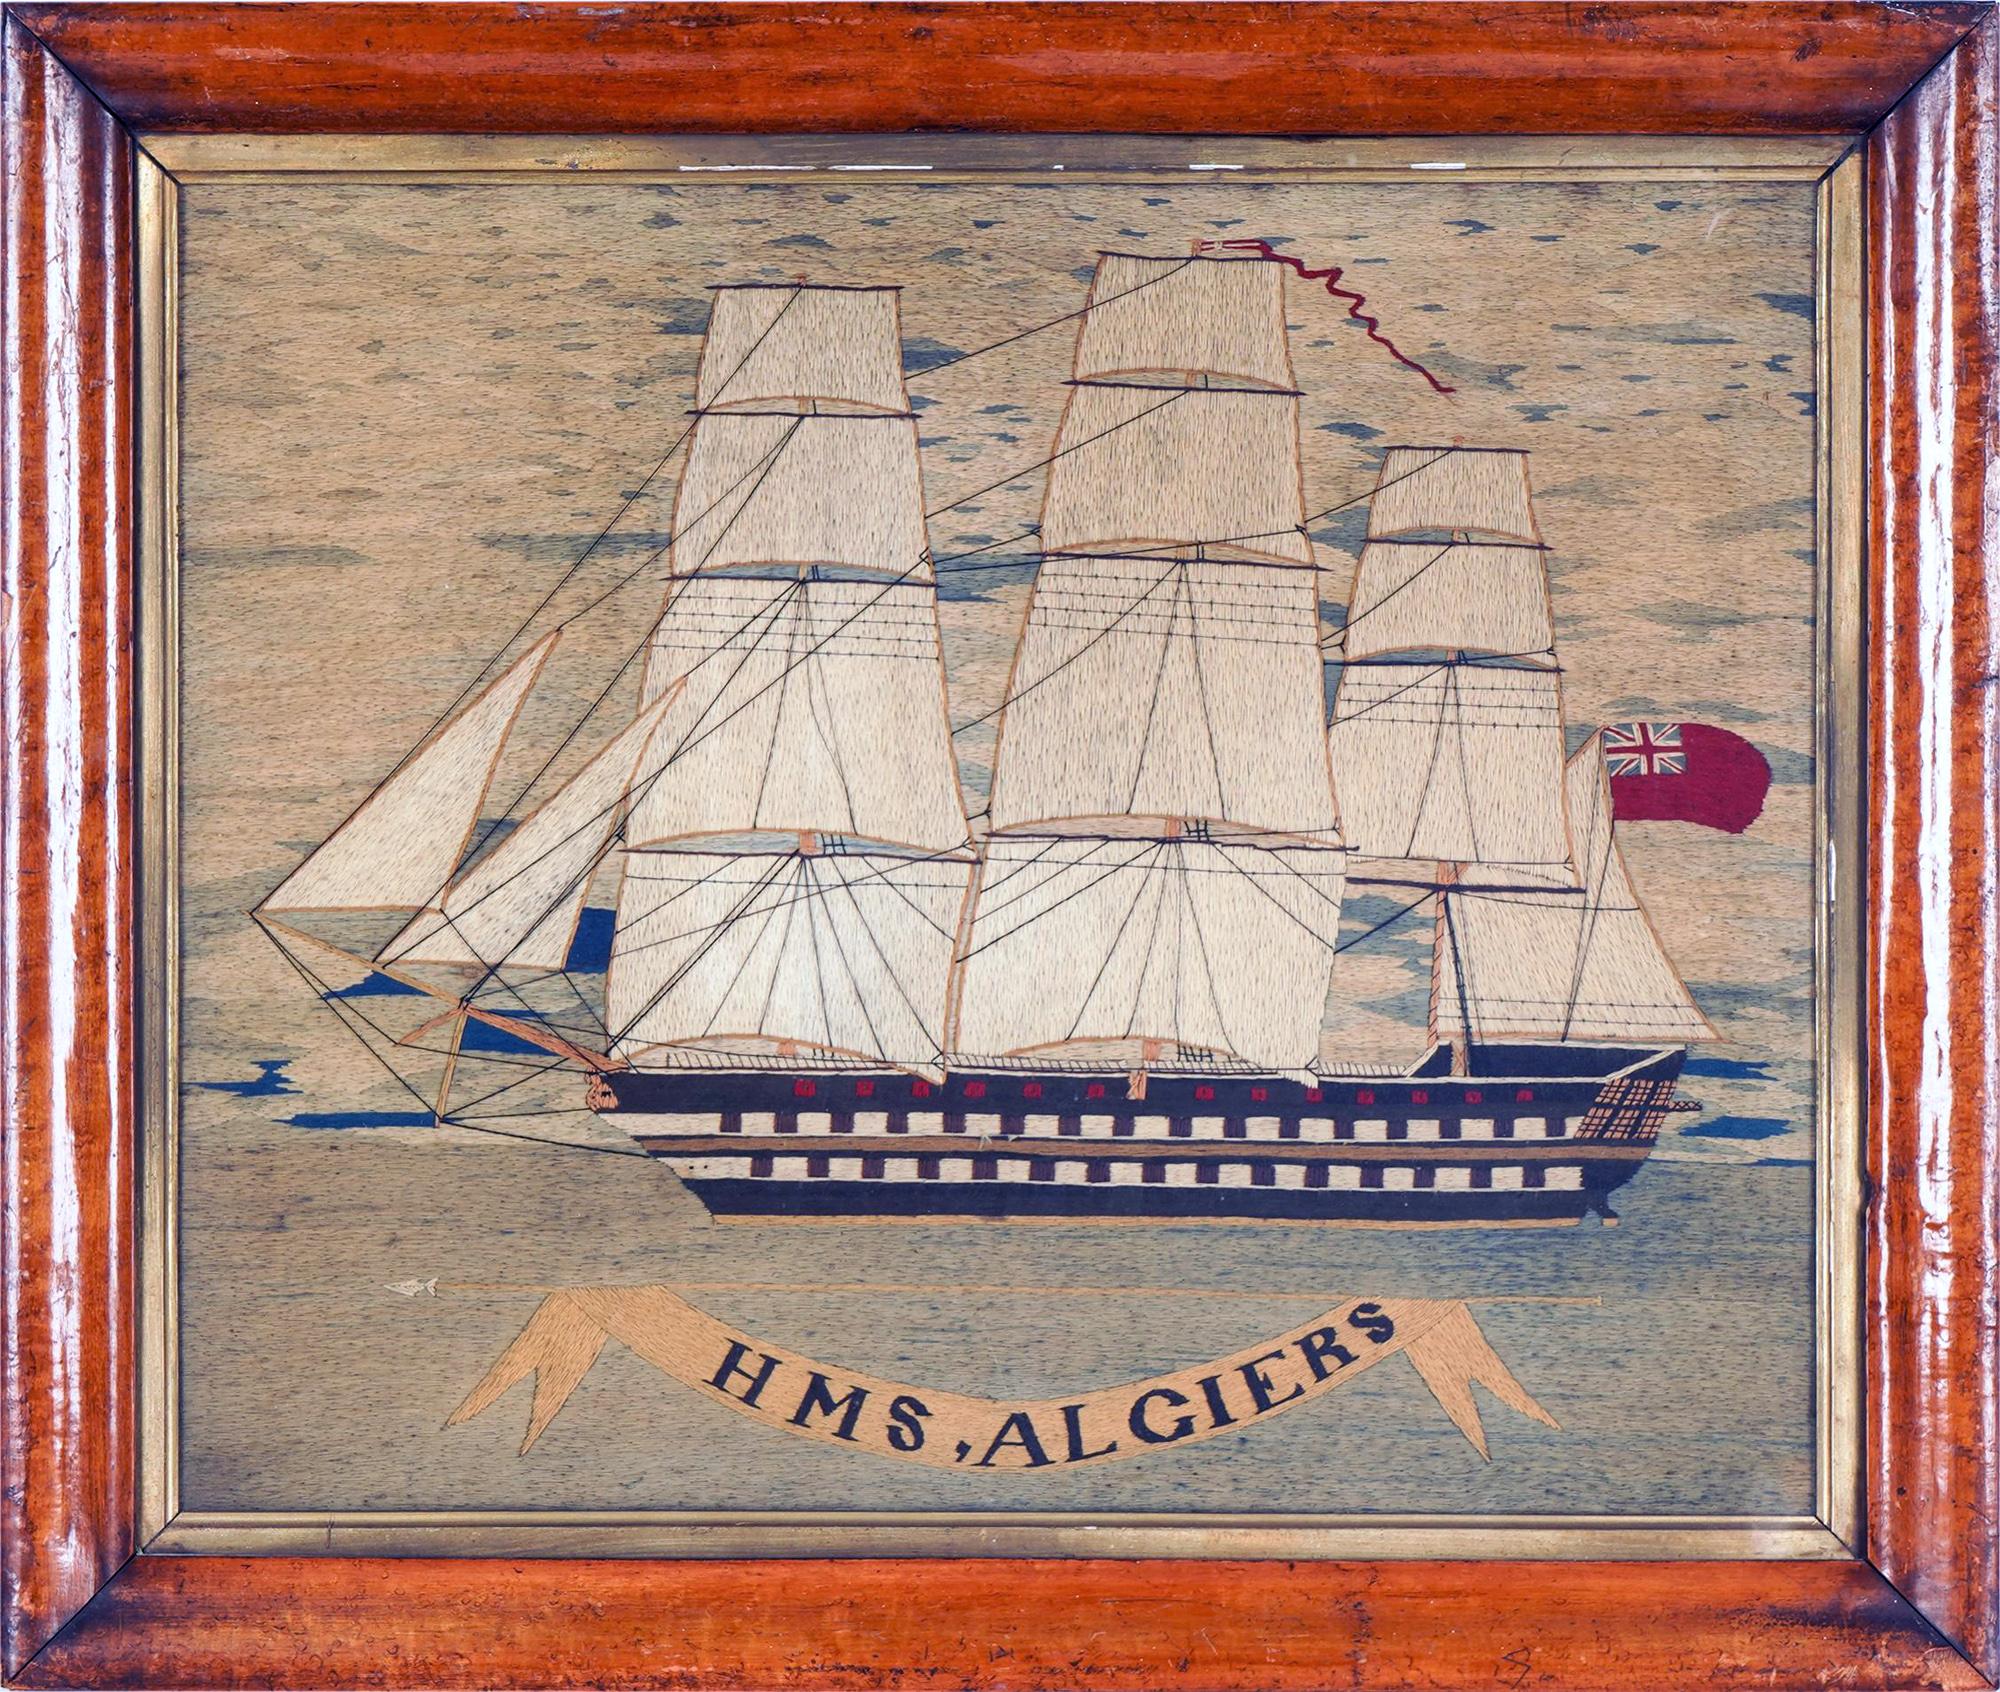 British sailor's woolwork of H.M.S. Algiers,
Circa 1865

The British sailor's woolie depicts the HMS Algiers. The Second Rate Battleship is depicted under sail with a portside view as she sails on a blue sea. The ship is named on a light colored